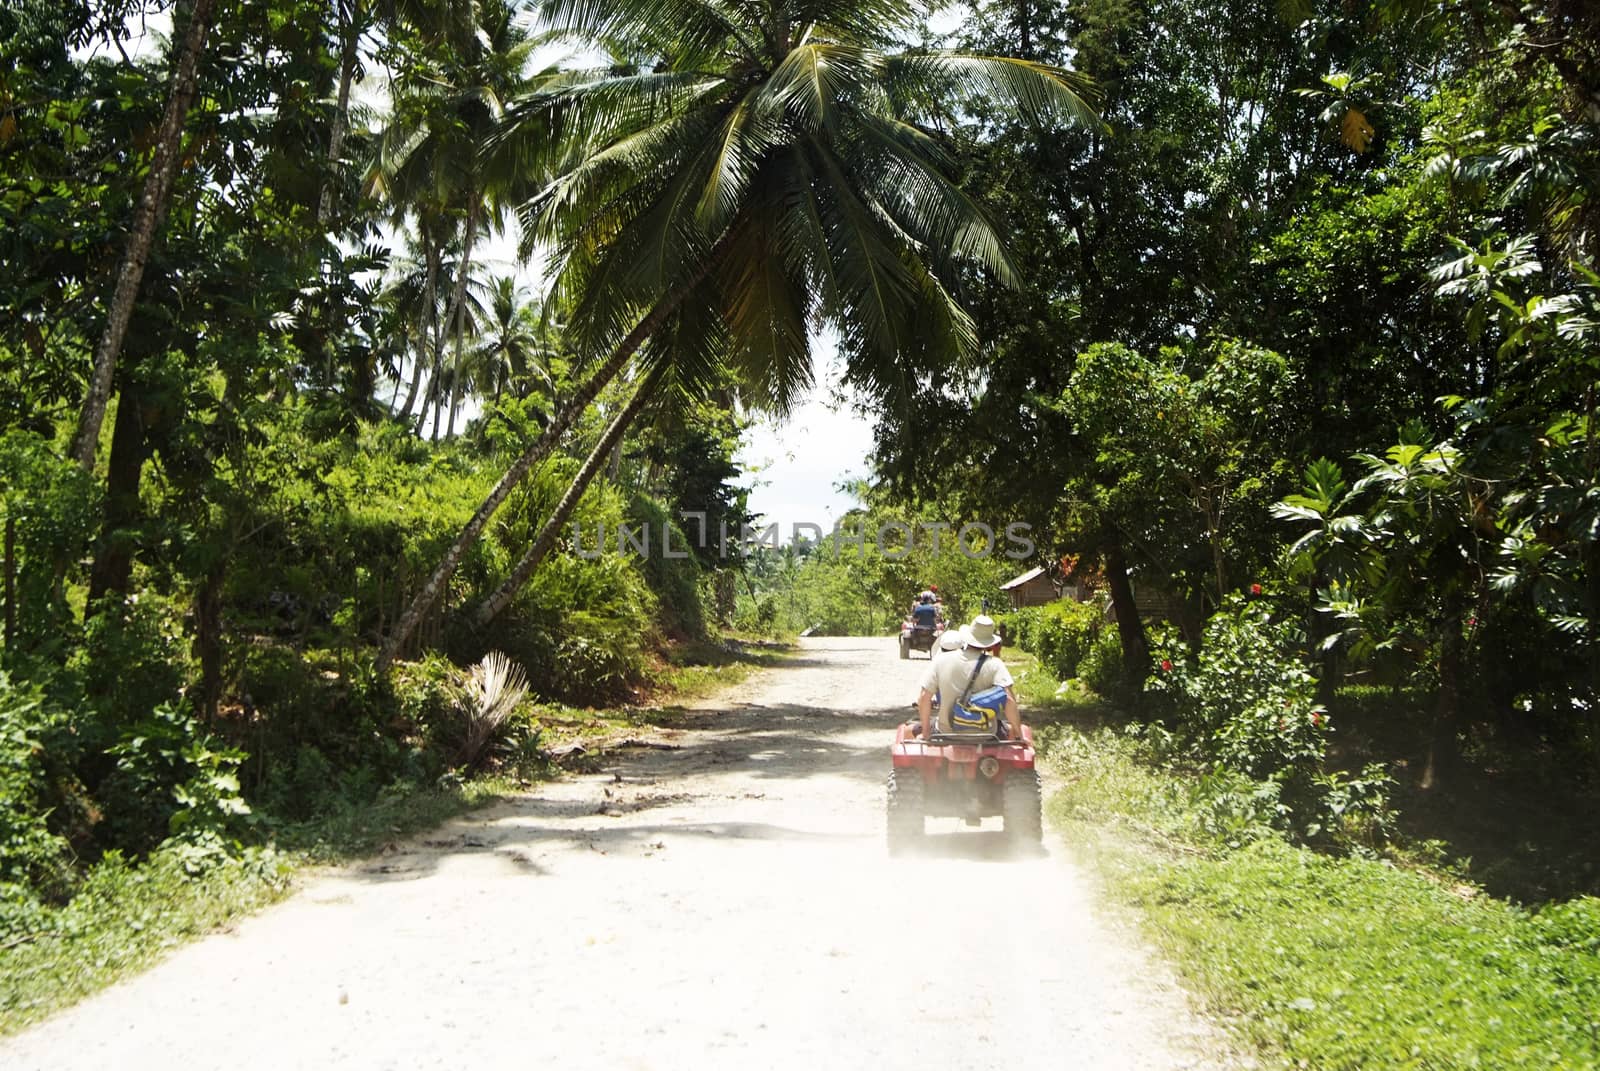 Tropical forest with ATV's driving in Cayo Levantado, Dominican Republic. by mirceadobre78